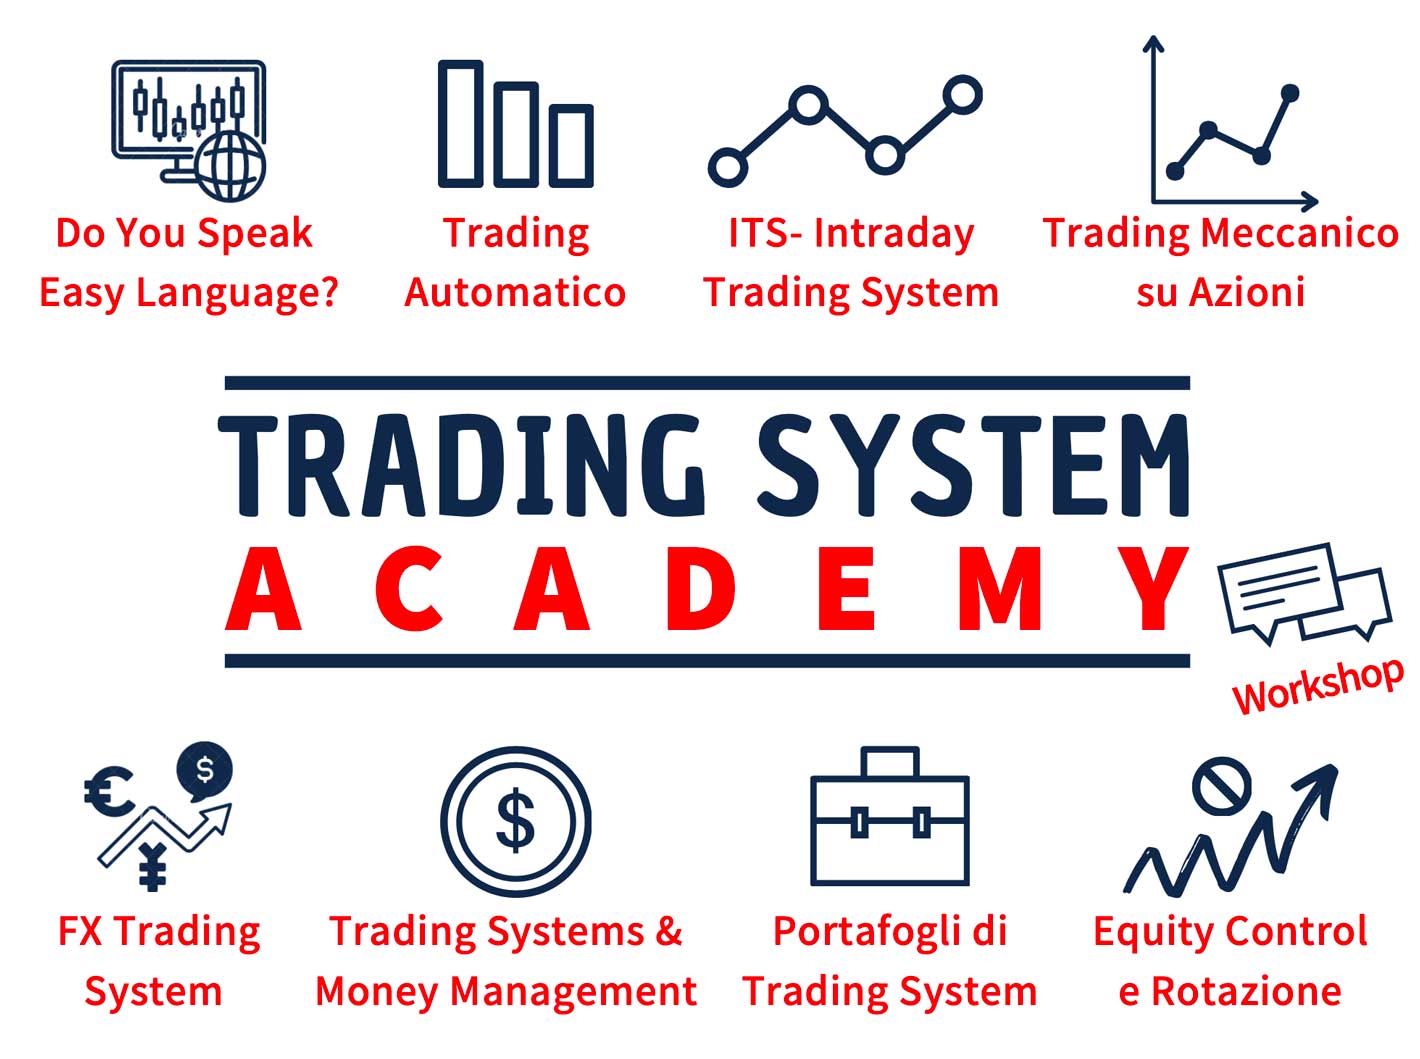 qtlab corsi trading systems online, trading system academy 